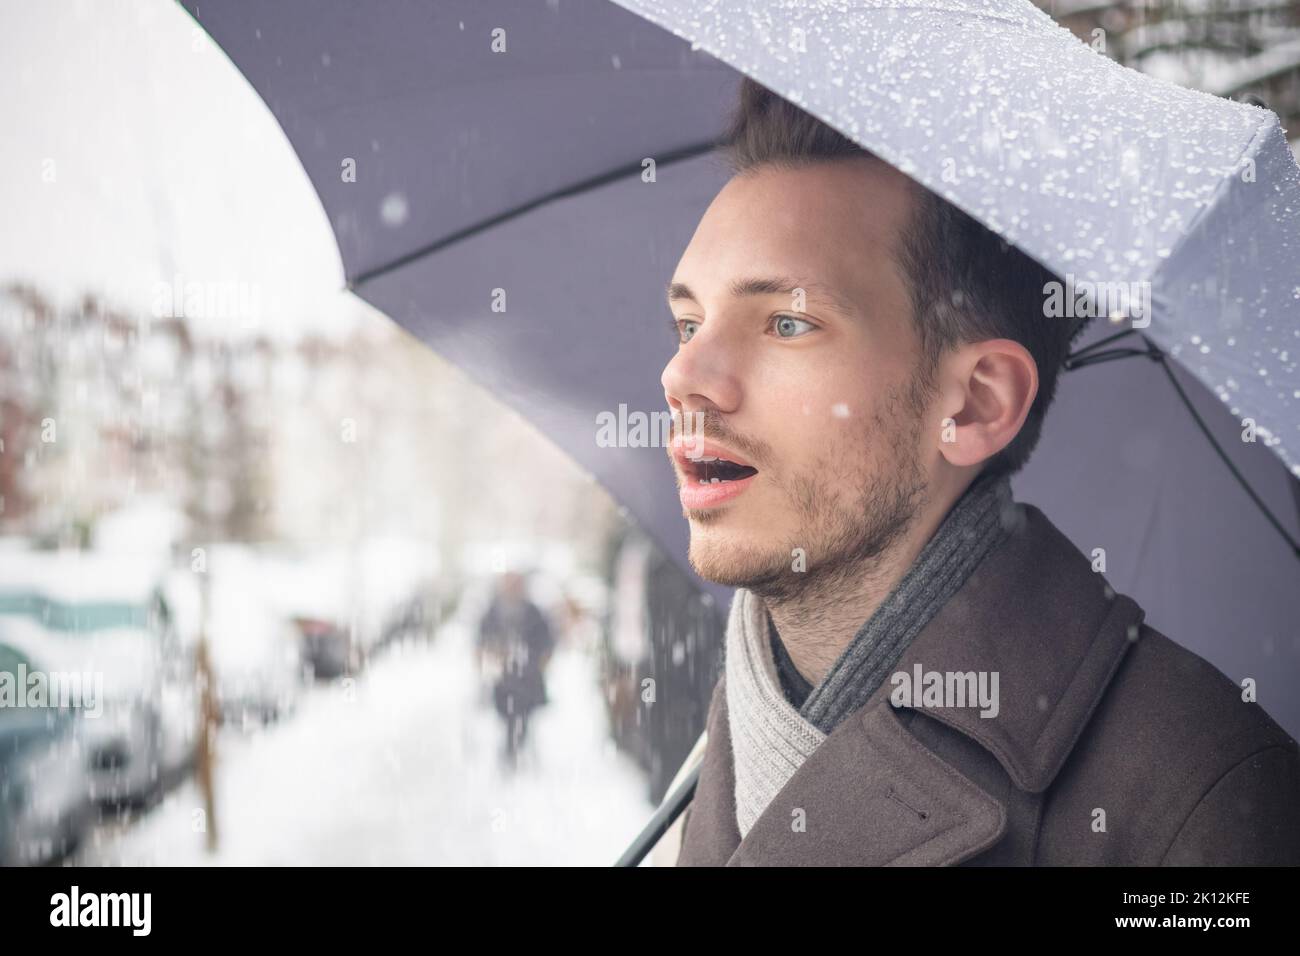 Portrait of a handsome young man with umbrella breathing warm air in winter snow Stock Photo